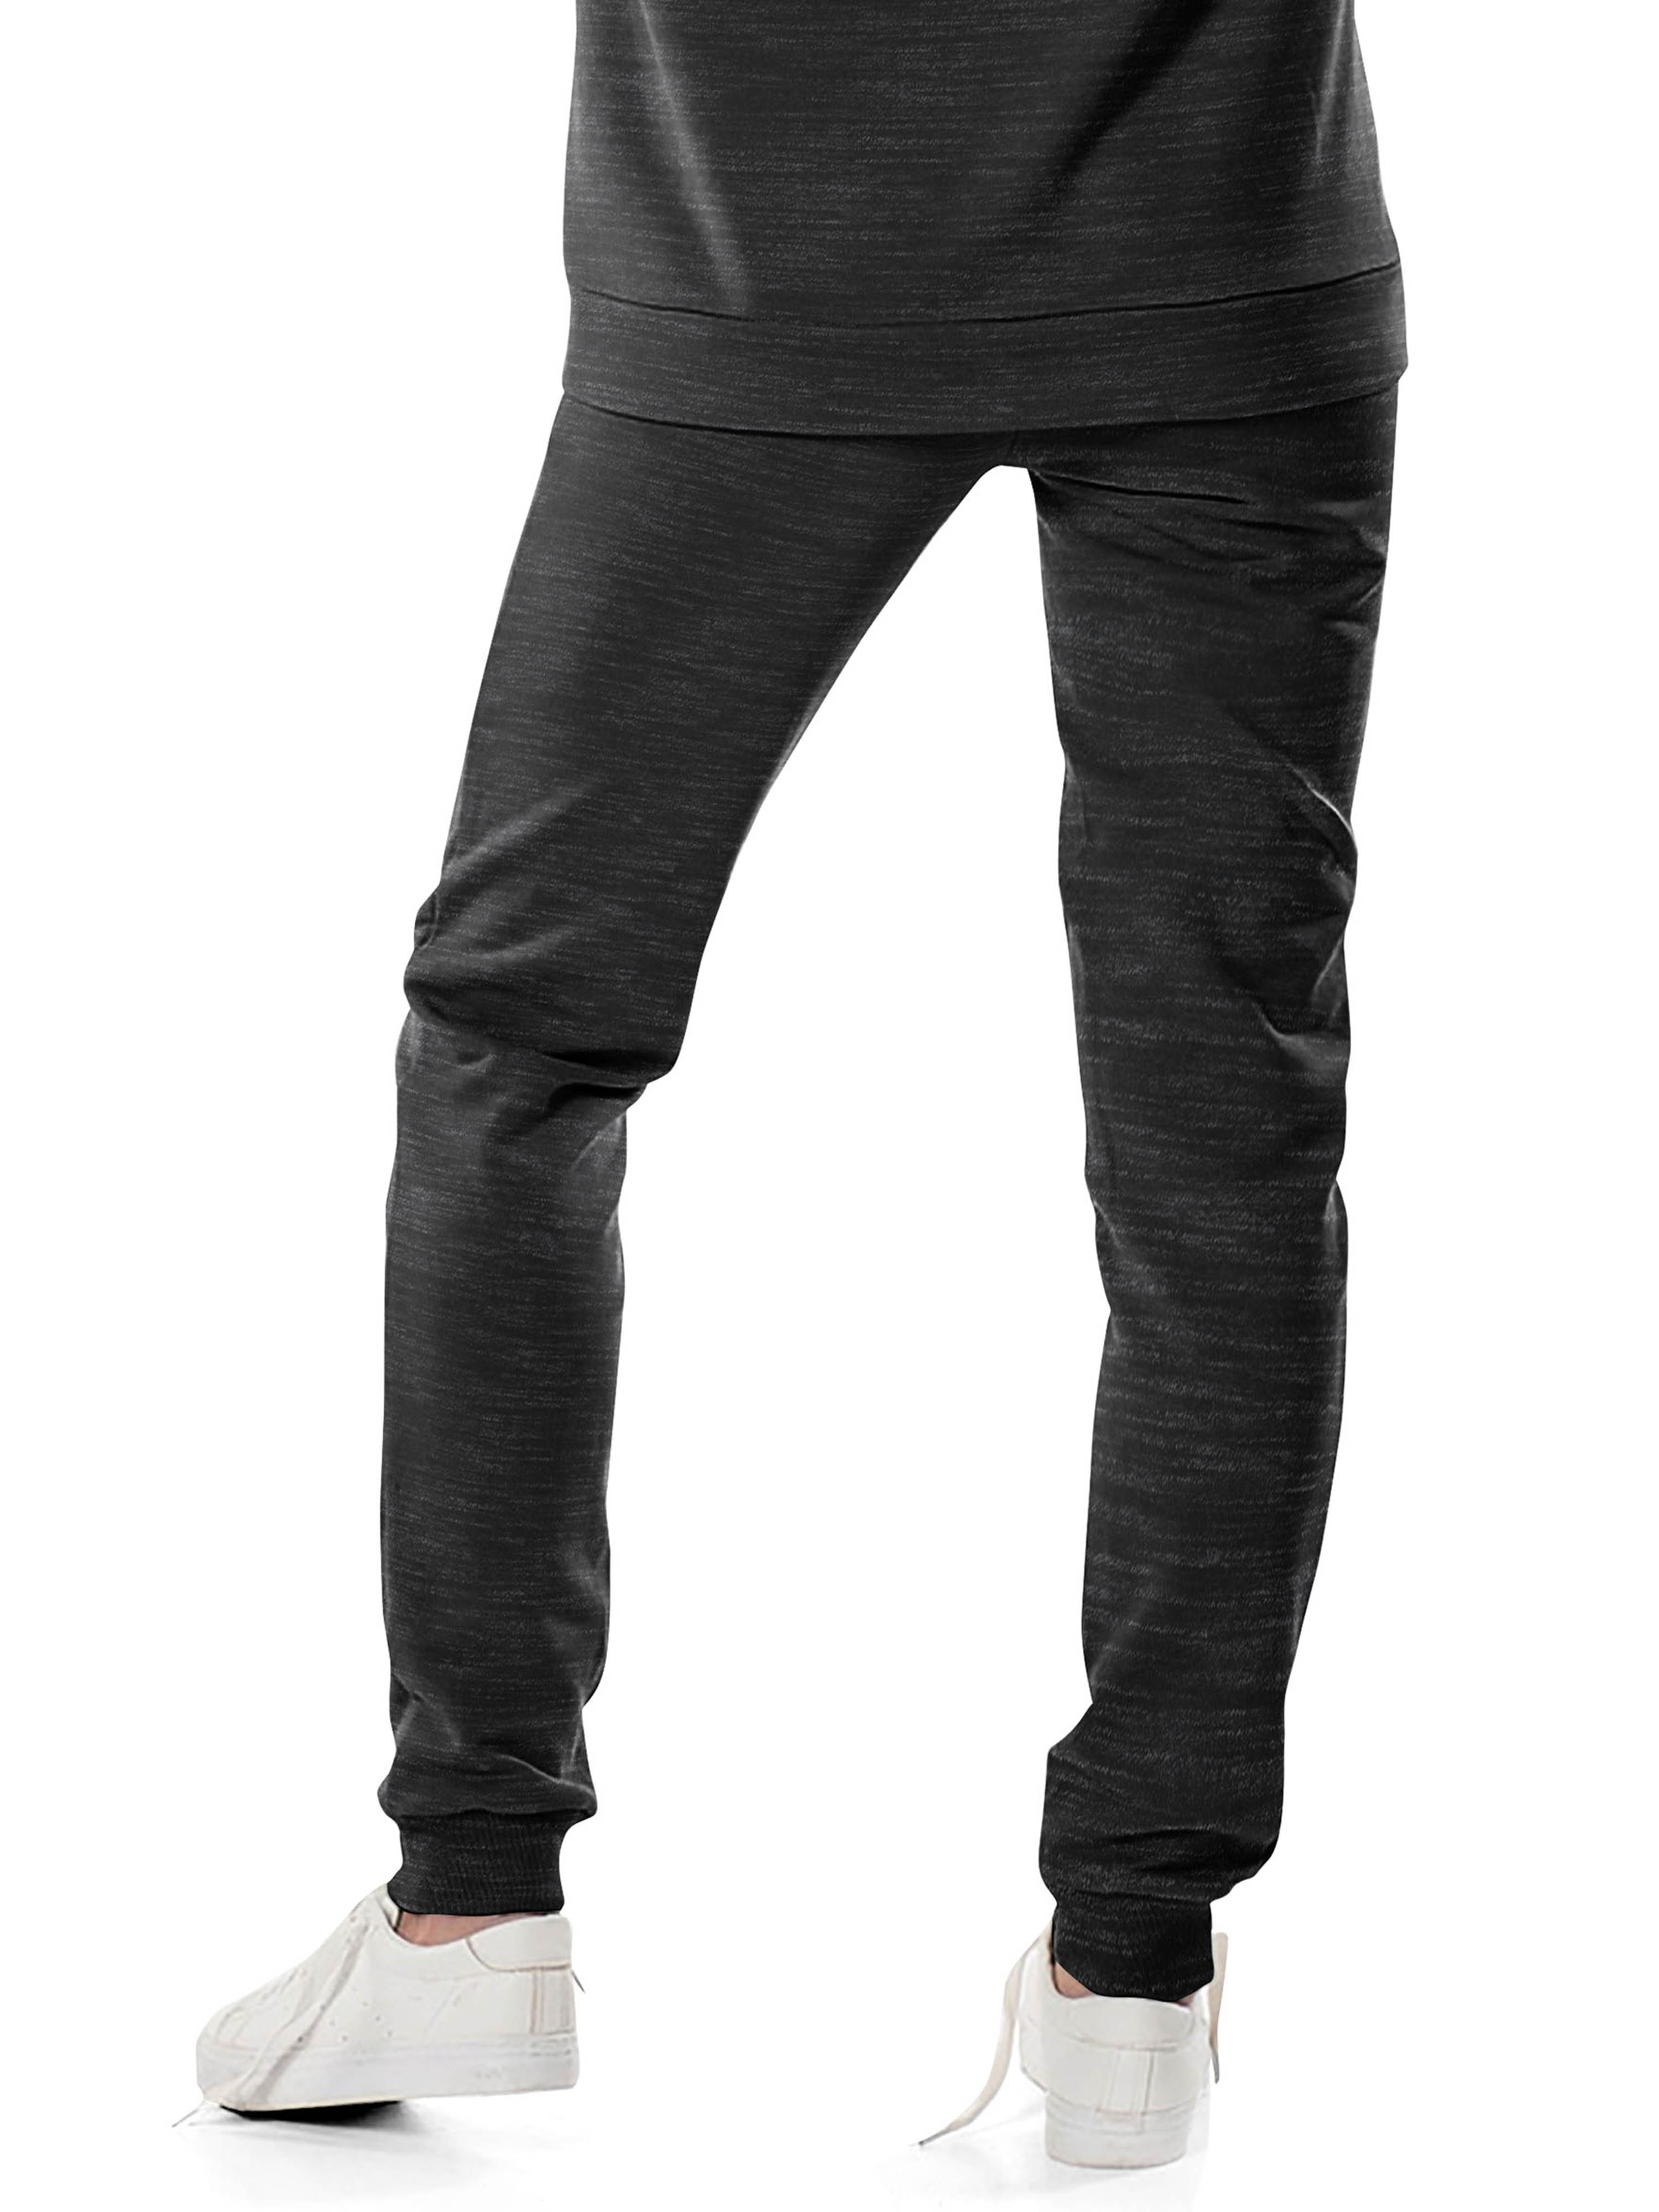 Hat and Beyond Women's Wrinkle Resistant Cotton Blended Joggers French Terry Sweatpants - image 2 of 3